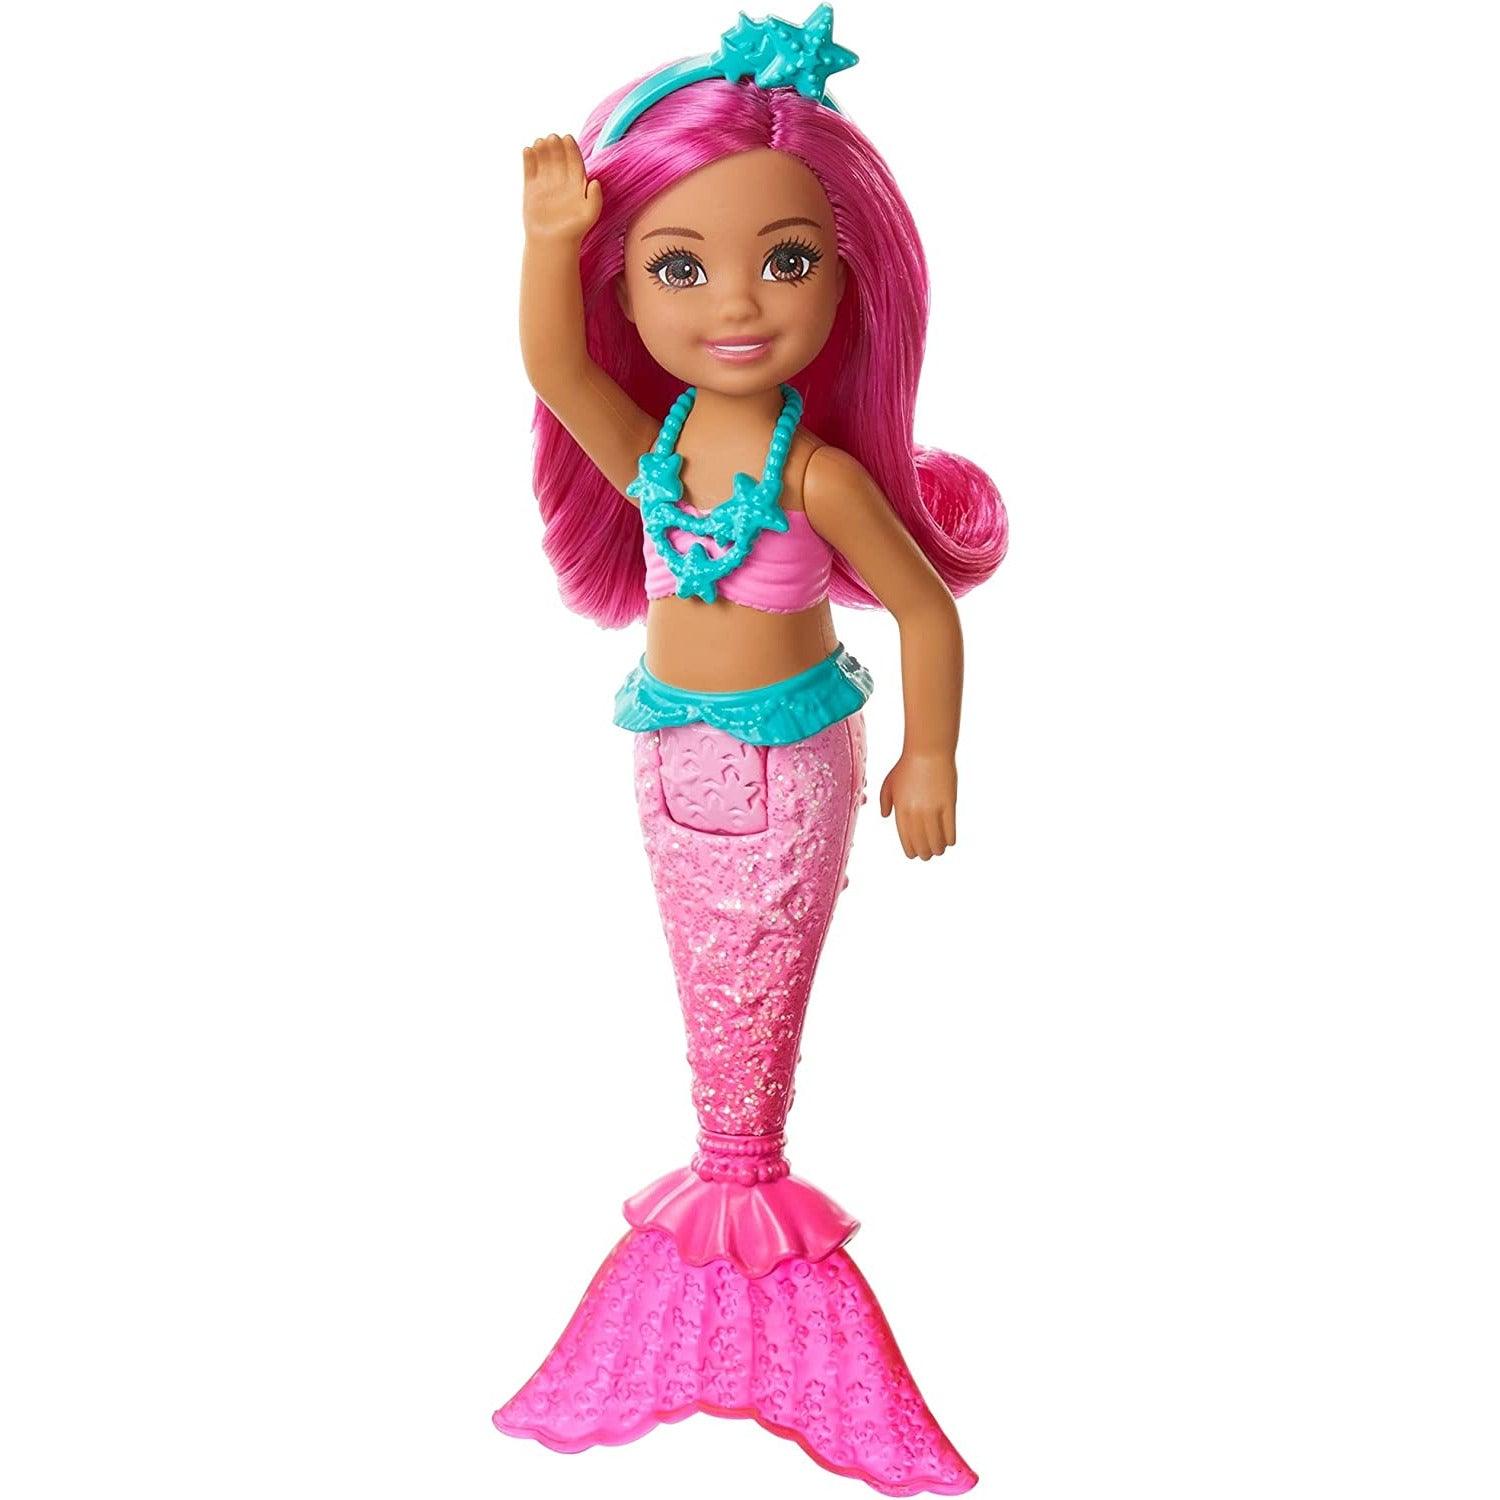 Barbie Dreamtopia Chelsea Mermaid Doll, 6.5-inch with Pink Hair and Tail, Multicolor - BumbleToys - 5-7 Years, Barbie, Fashion Dolls & Accessories, Girls, Mermaid, Pre-Order